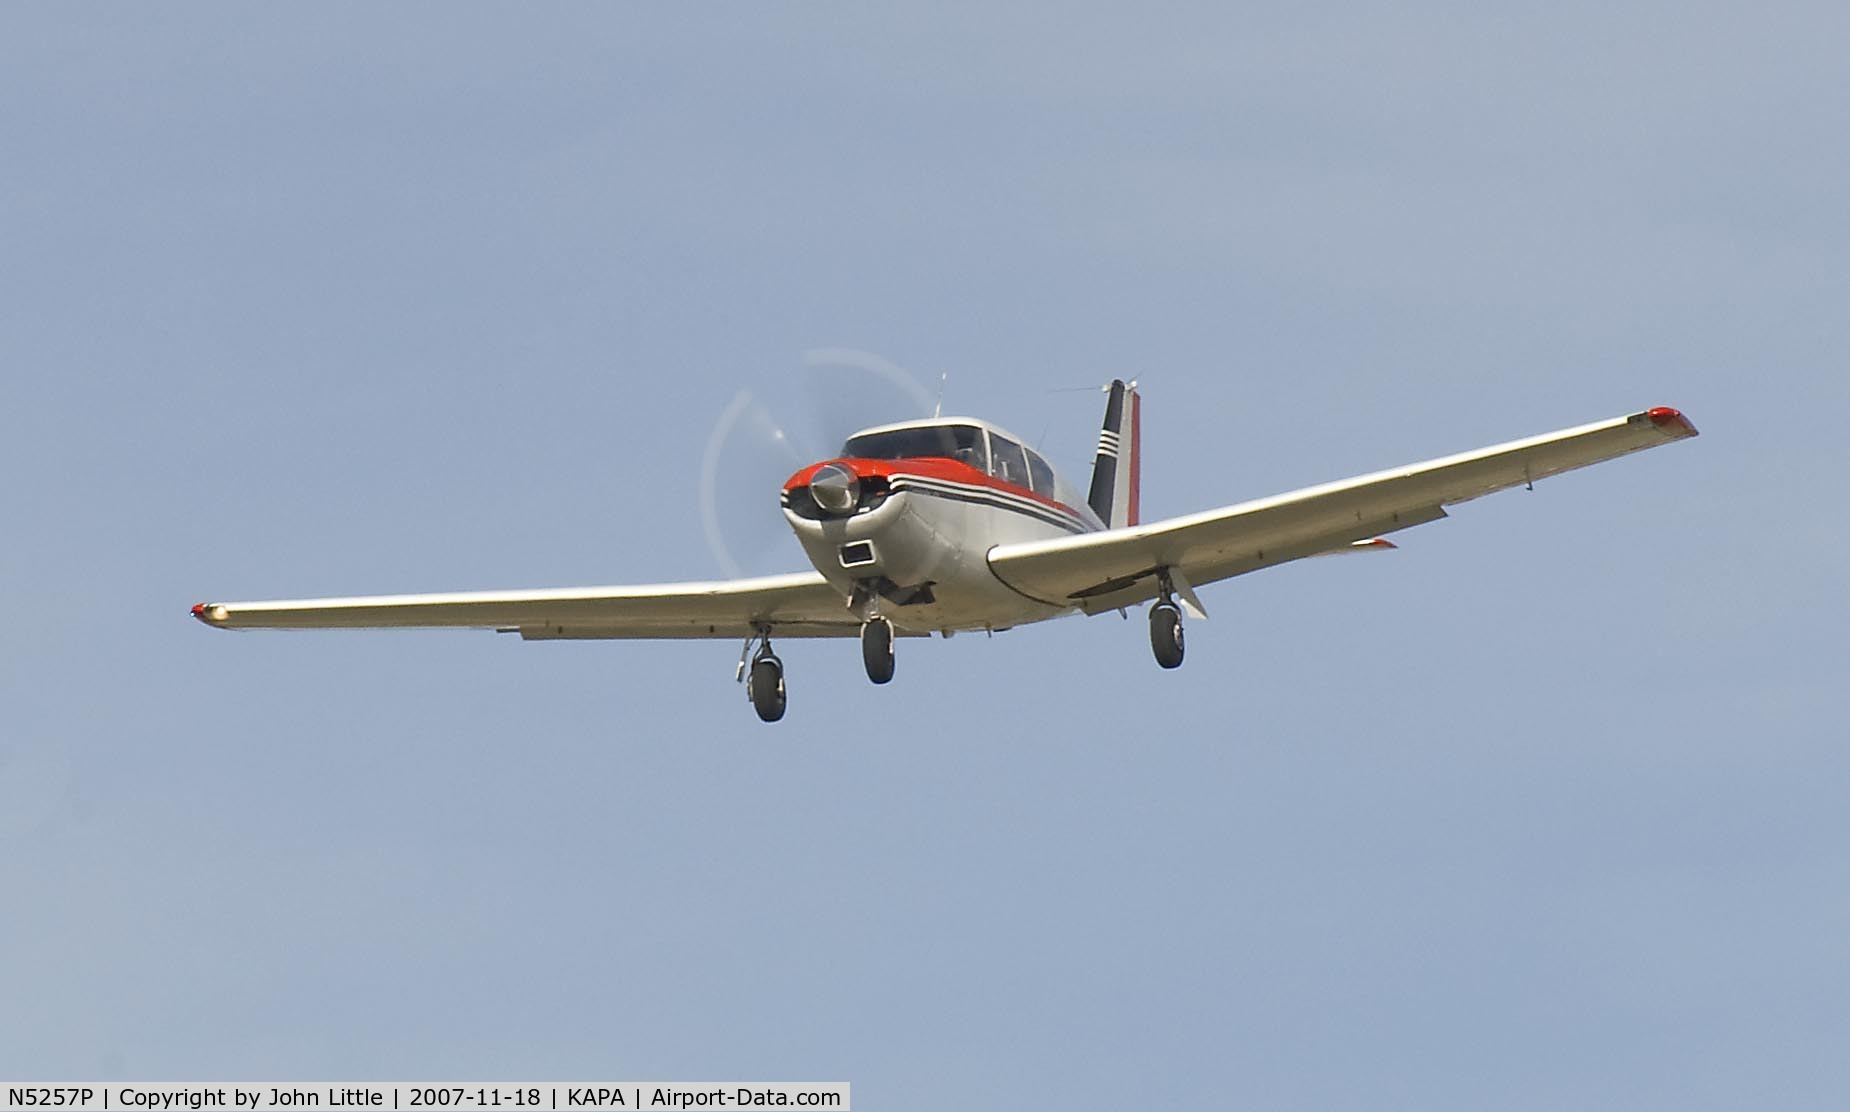 N5257P, 1958 Piper PA-24-250 Comanche C/N 24-289, Approach to 17L